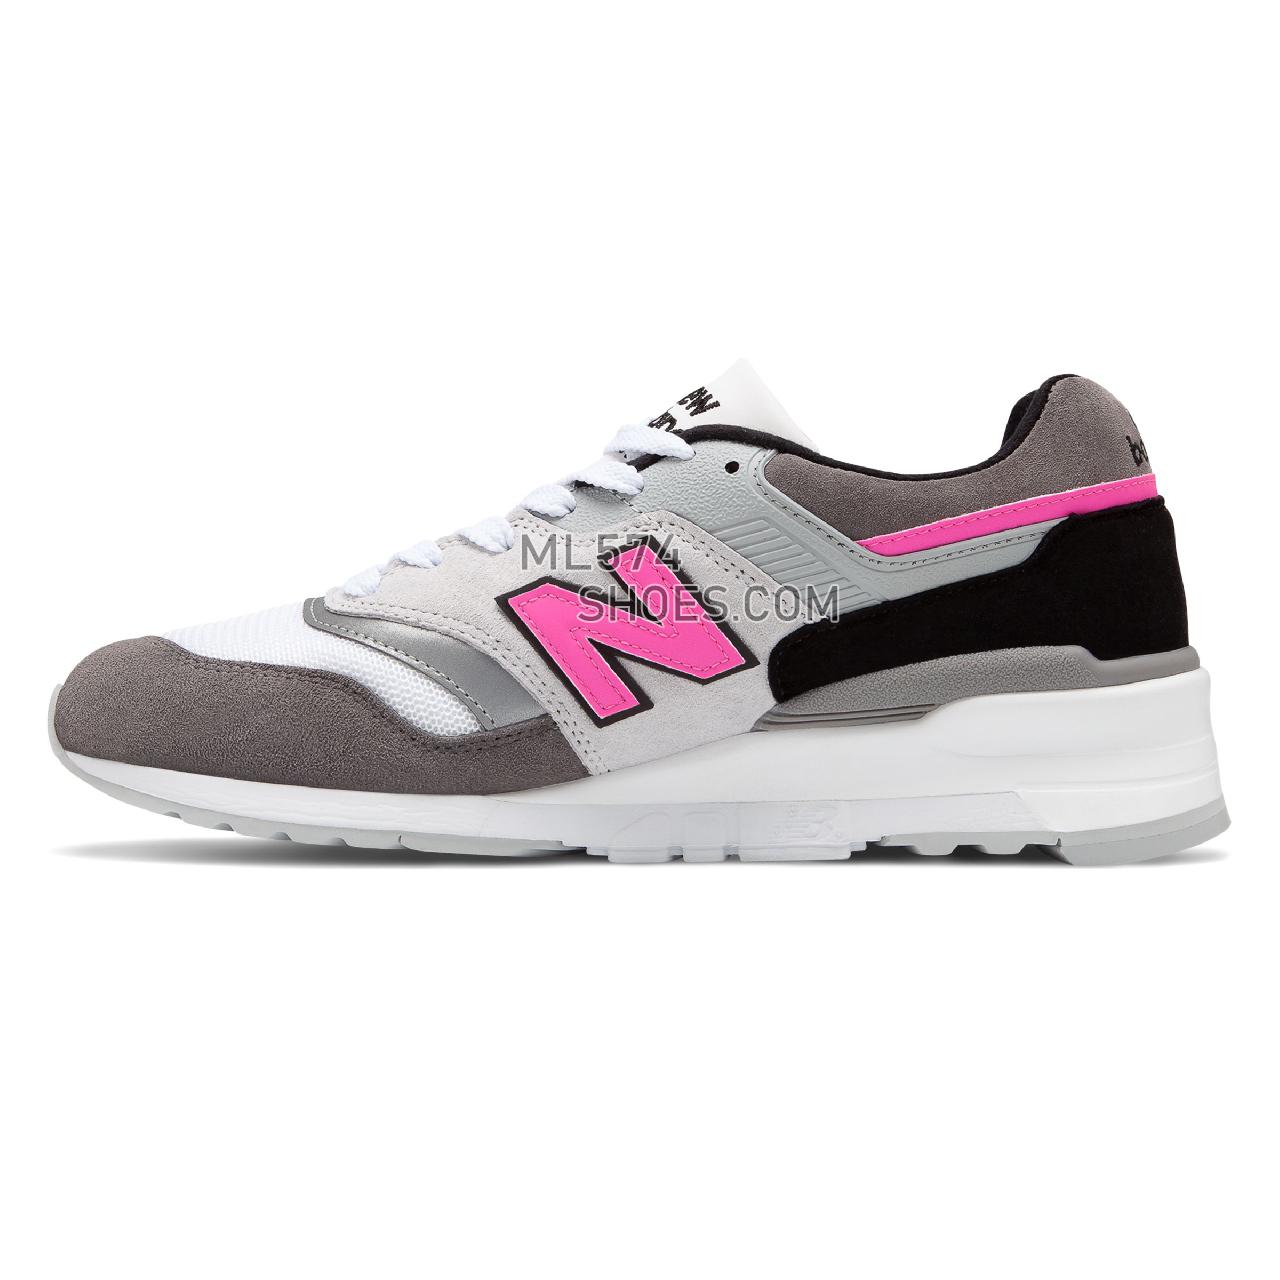 New Balance Made in US 997 - Men's Made in US 997 - Grey with Pink - M997LBK